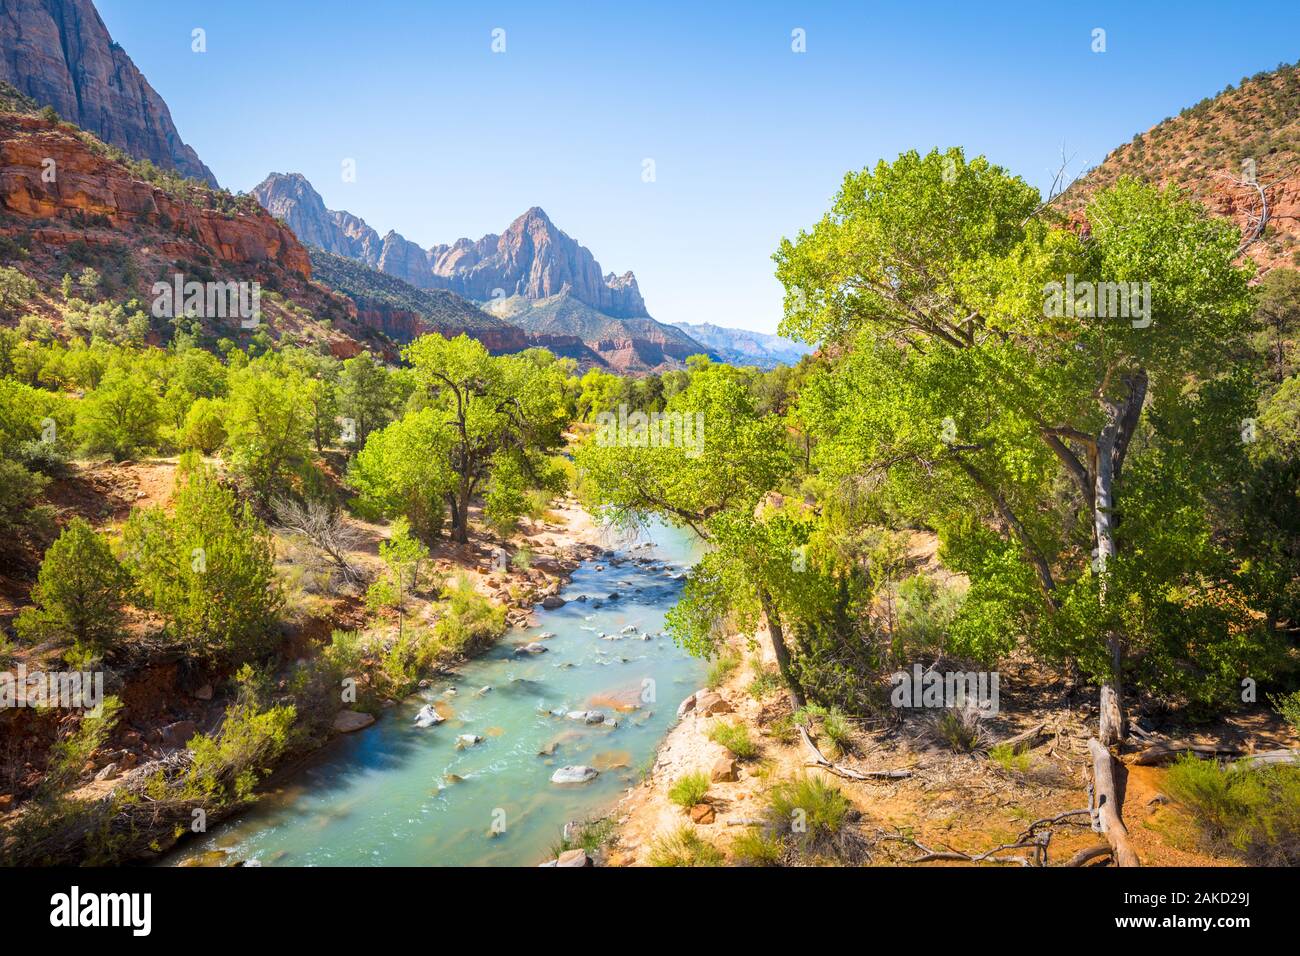 Zion National Park scenery with famous Virgin river and The Watchman mountain peak in the background on a sunny day with blue sky in summer, Utah, USA Stock Photo